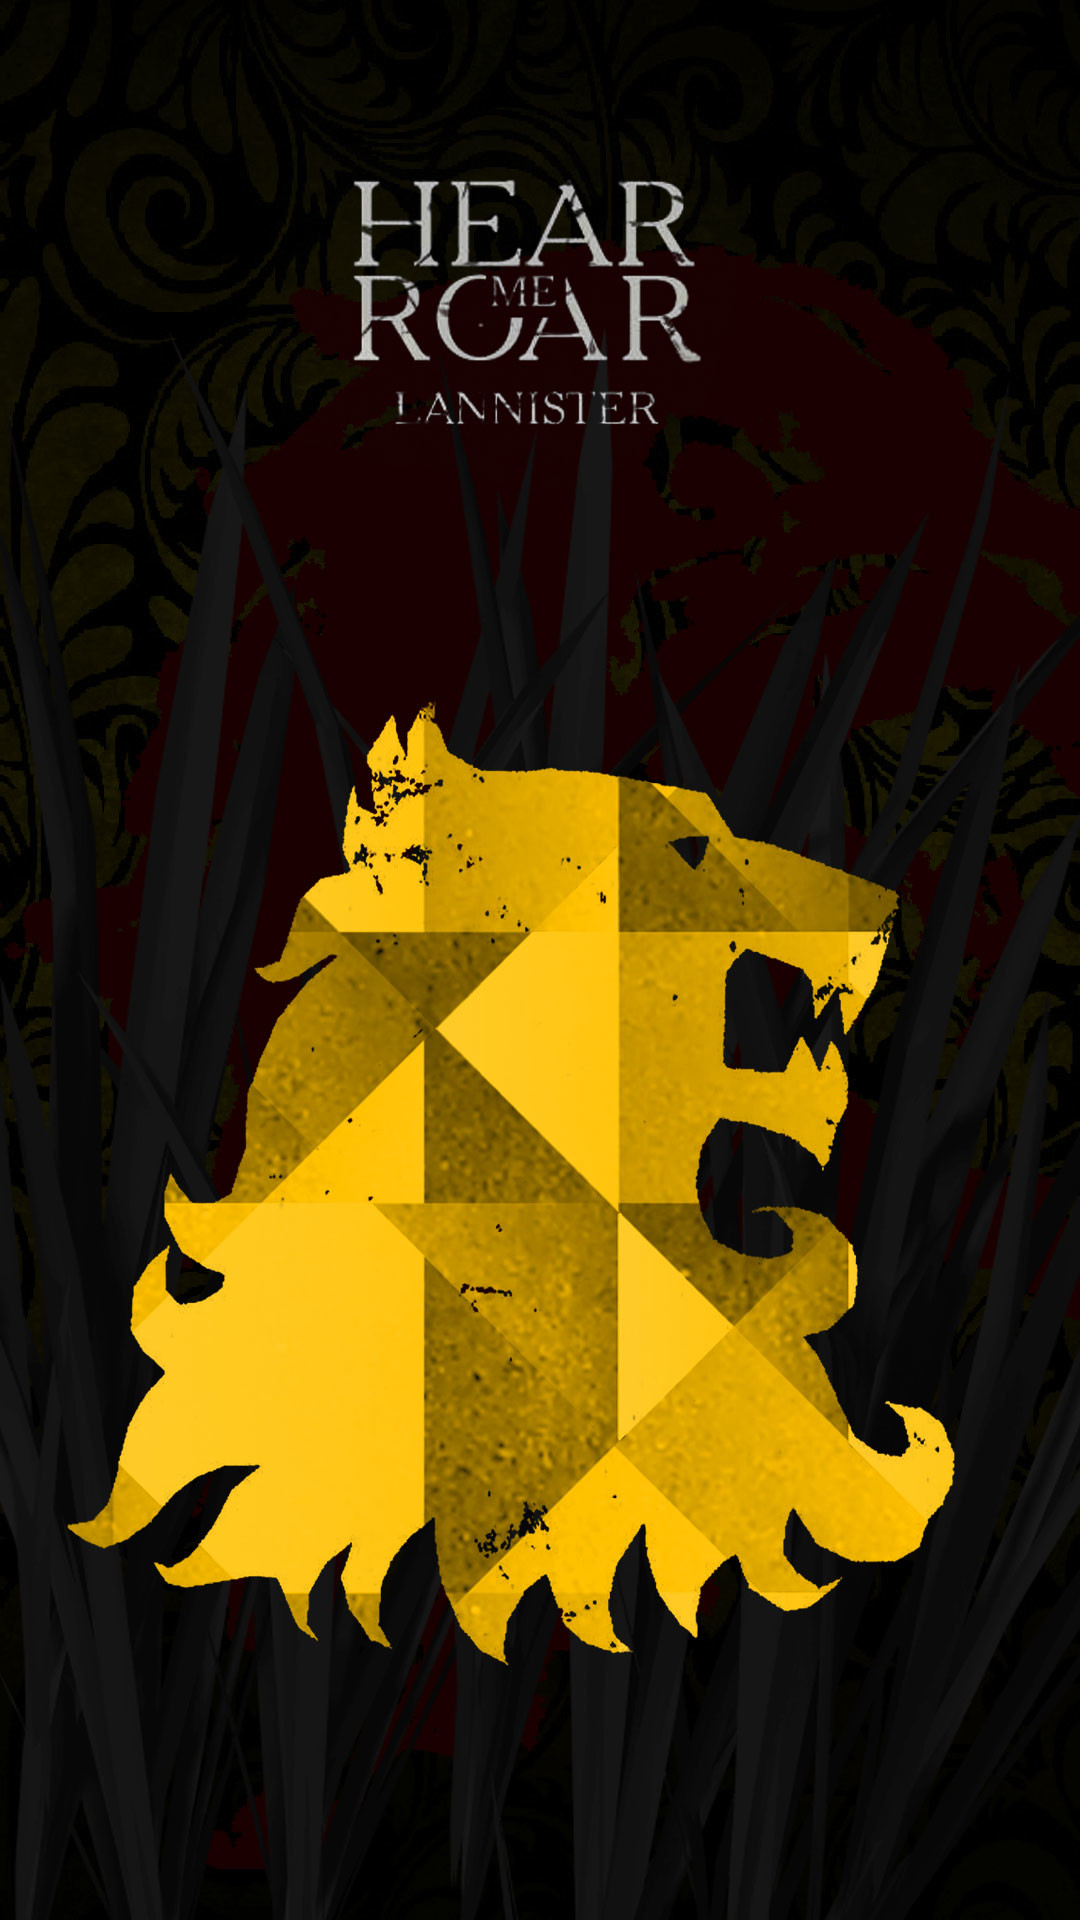 NoneNo SpoilersI made a Lannister wallpaper for mobile. Hope you guys like it